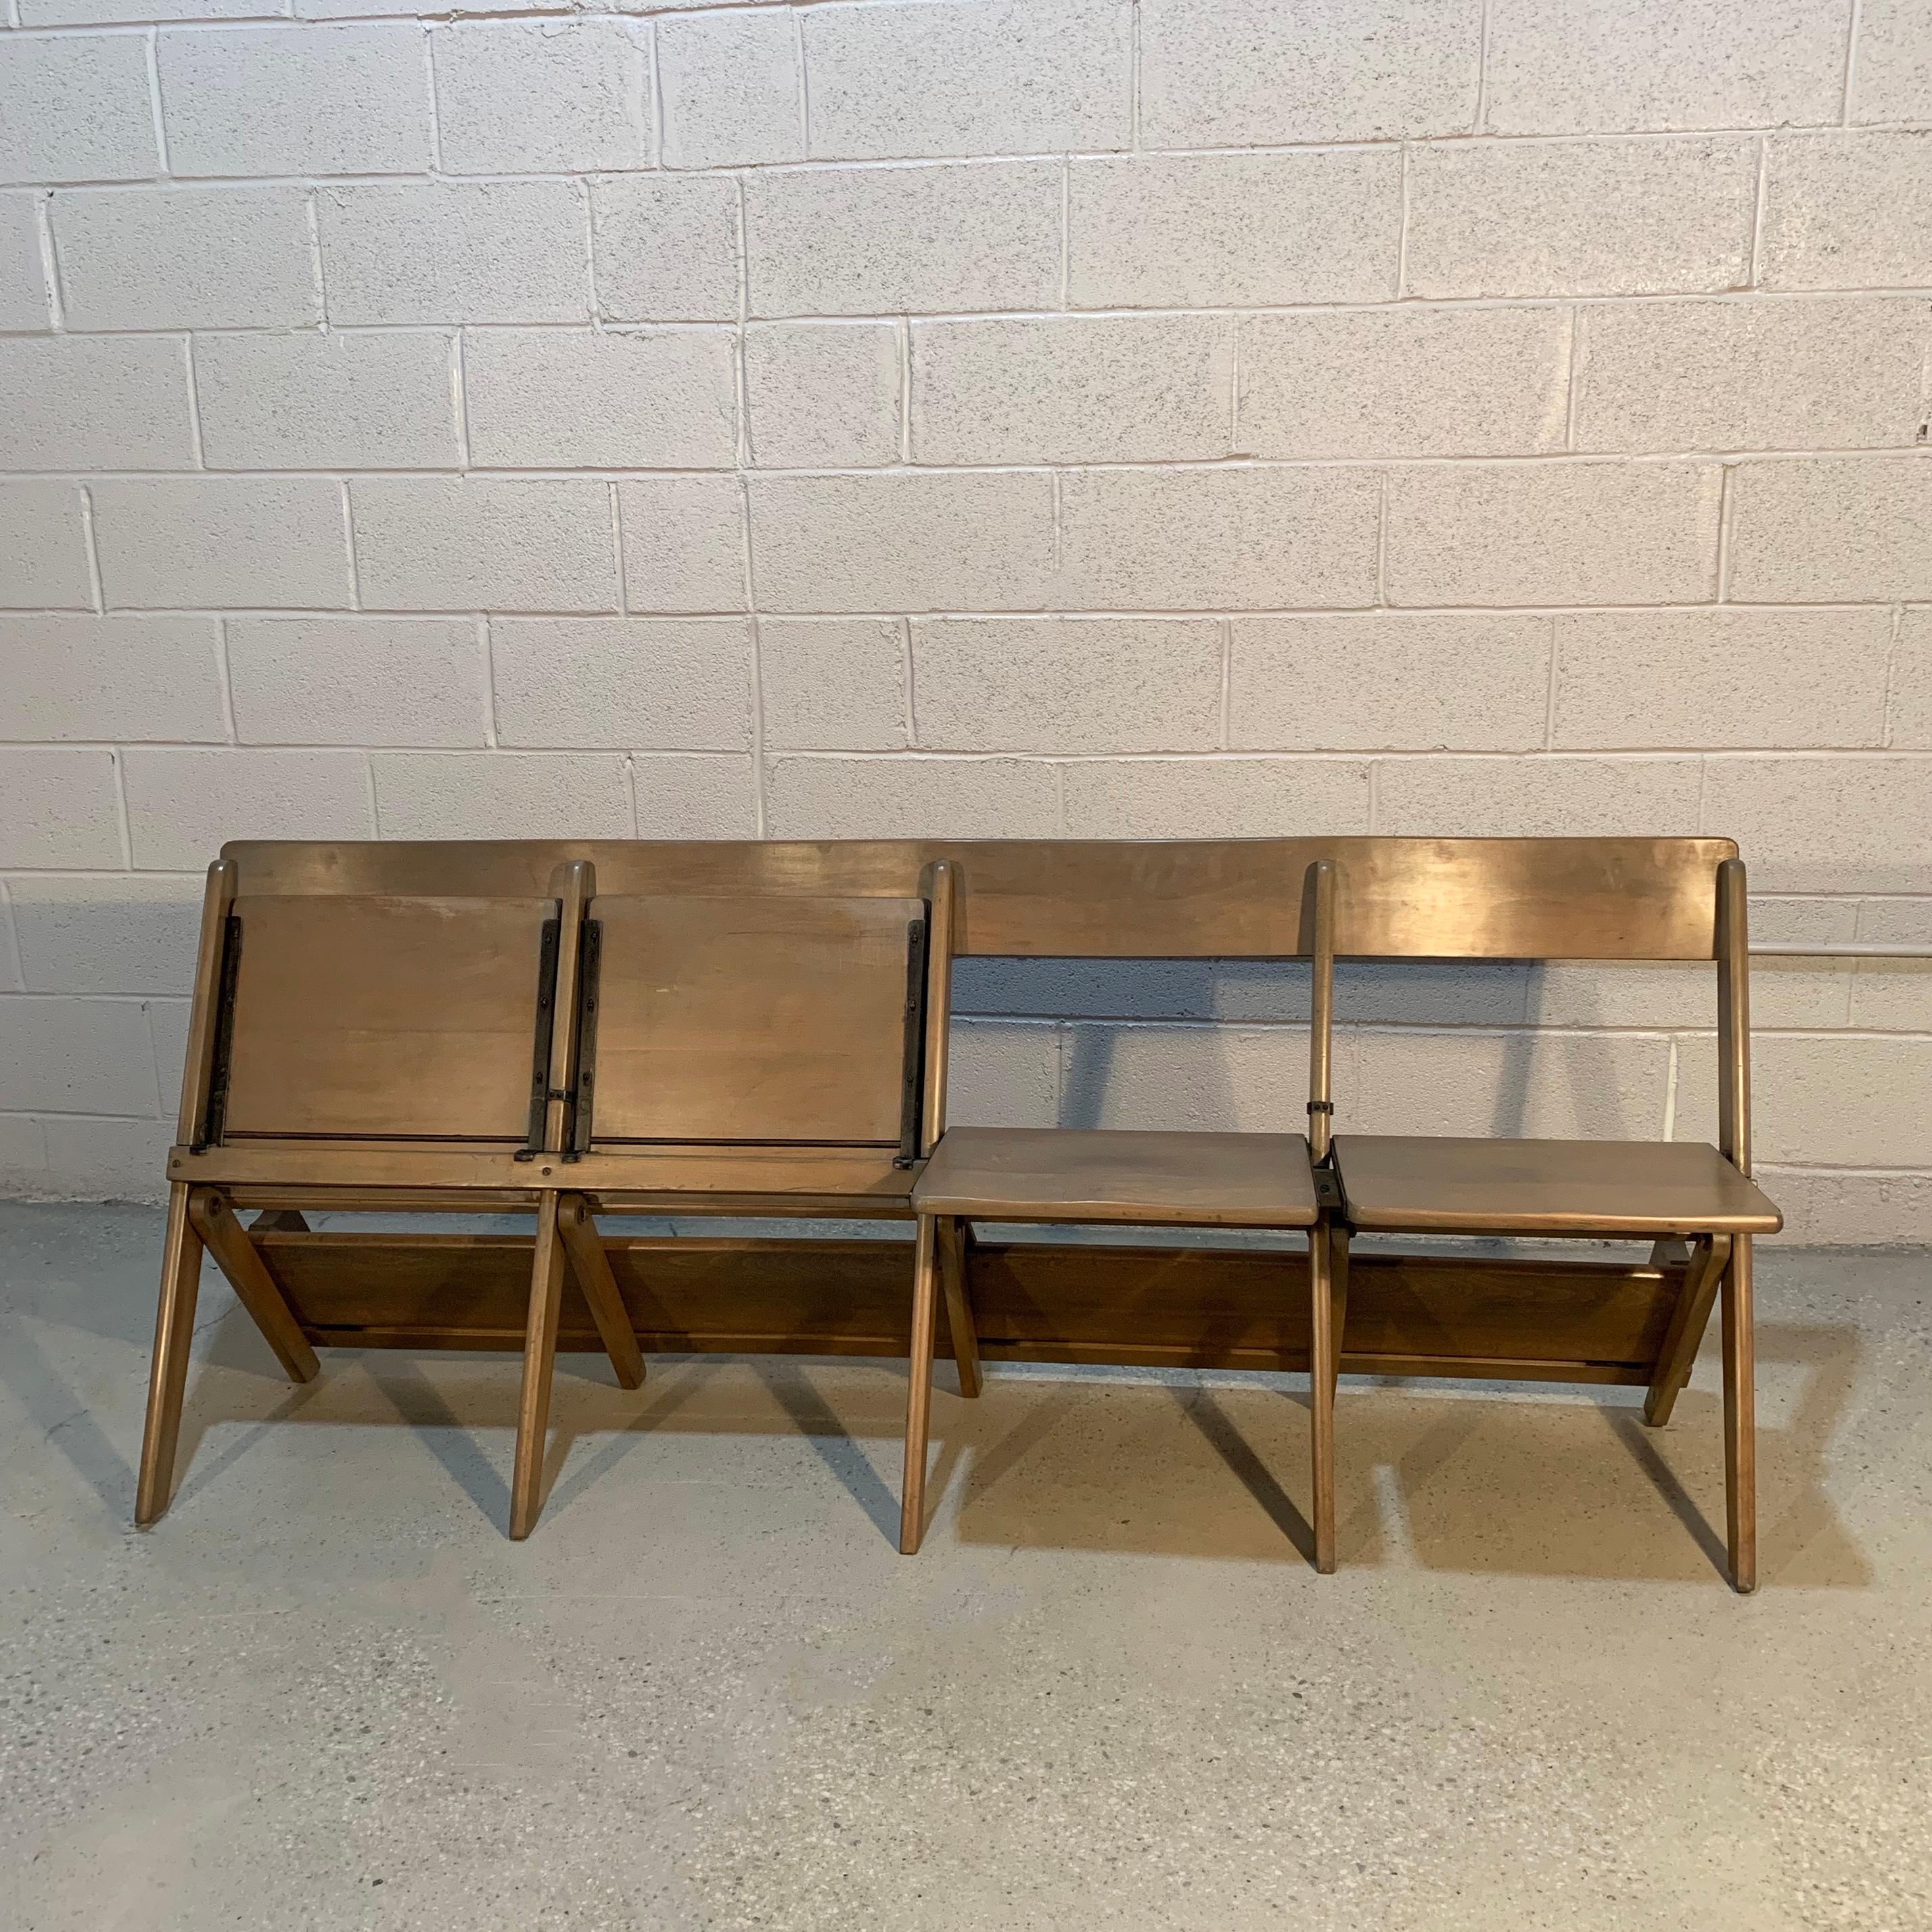 Midcentury Pickled Maple Folding Auditorium Theater Bench For Sale 2